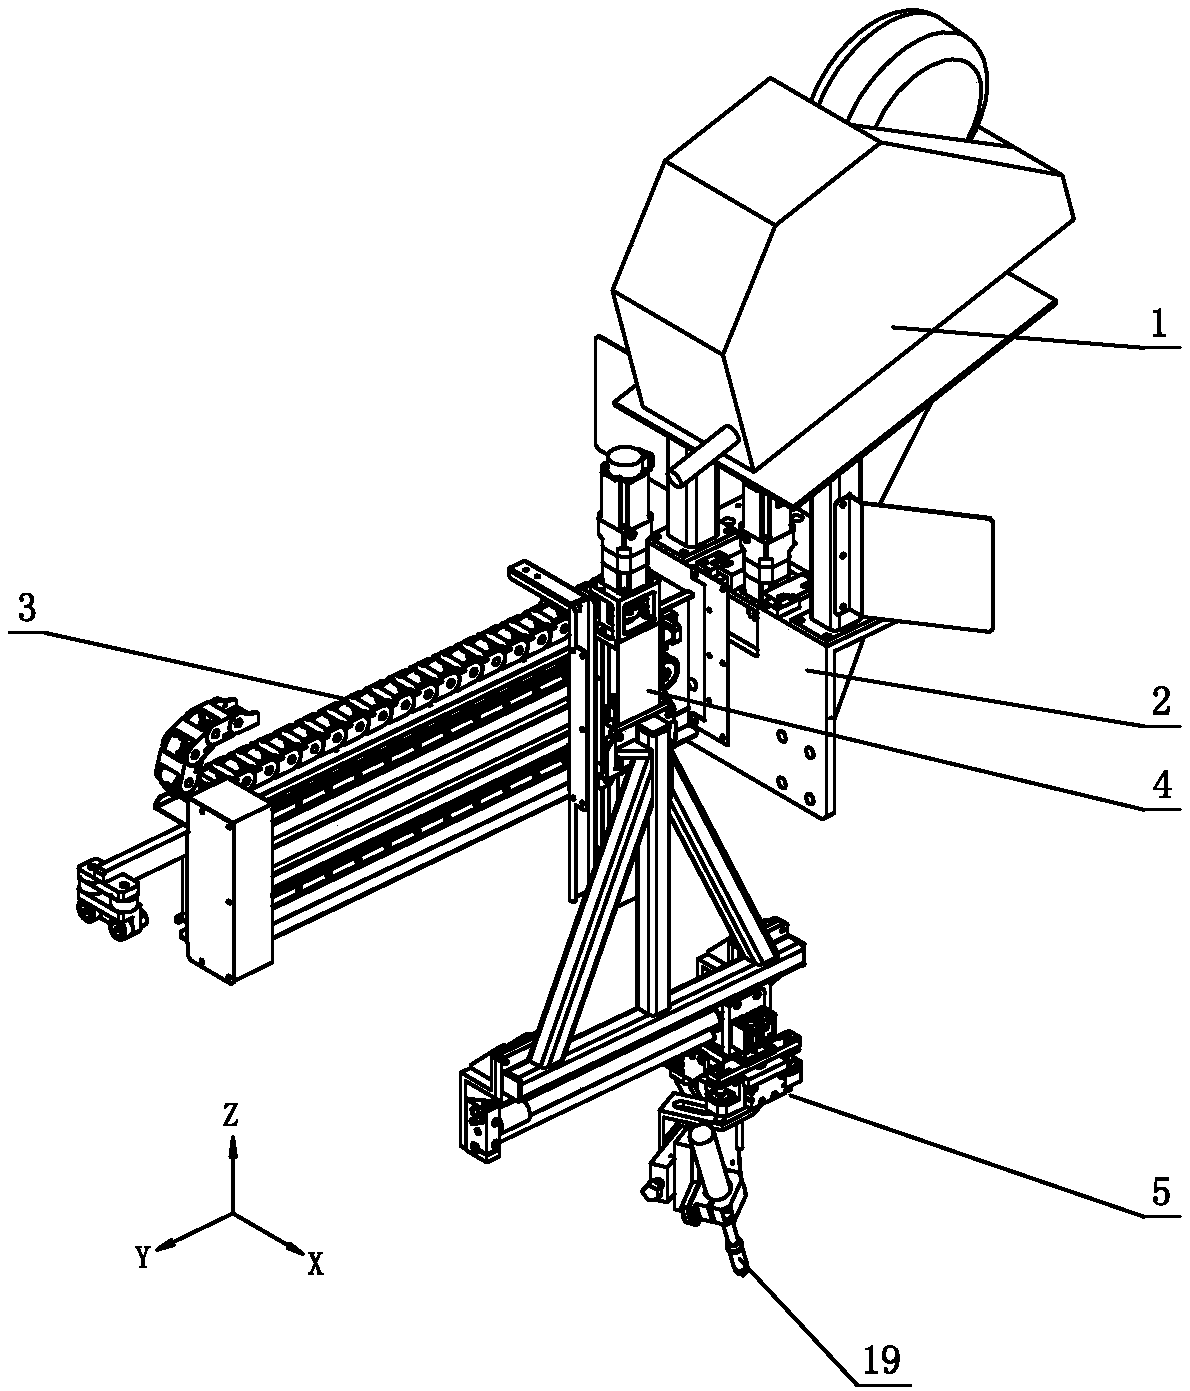 Three-axis real-time tracking welding device capable of conducting rotary symmetric welding